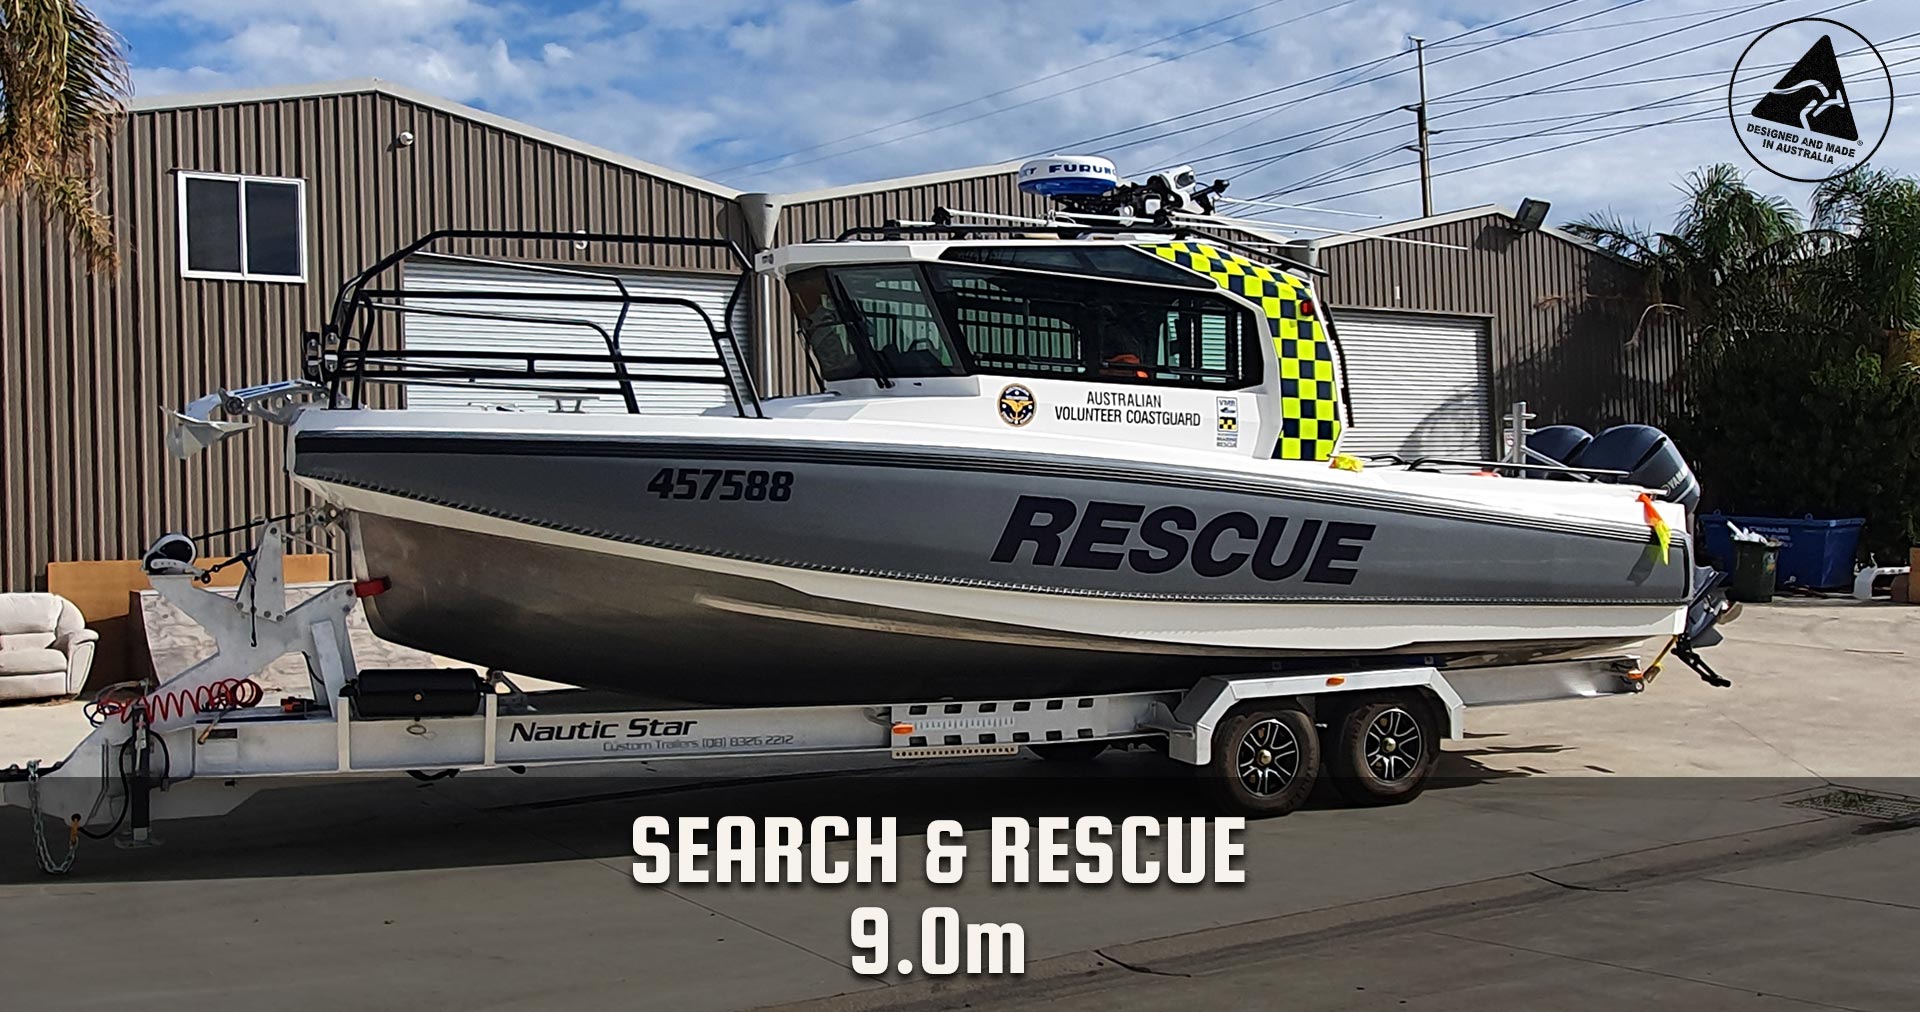 Custom made for search and rescue